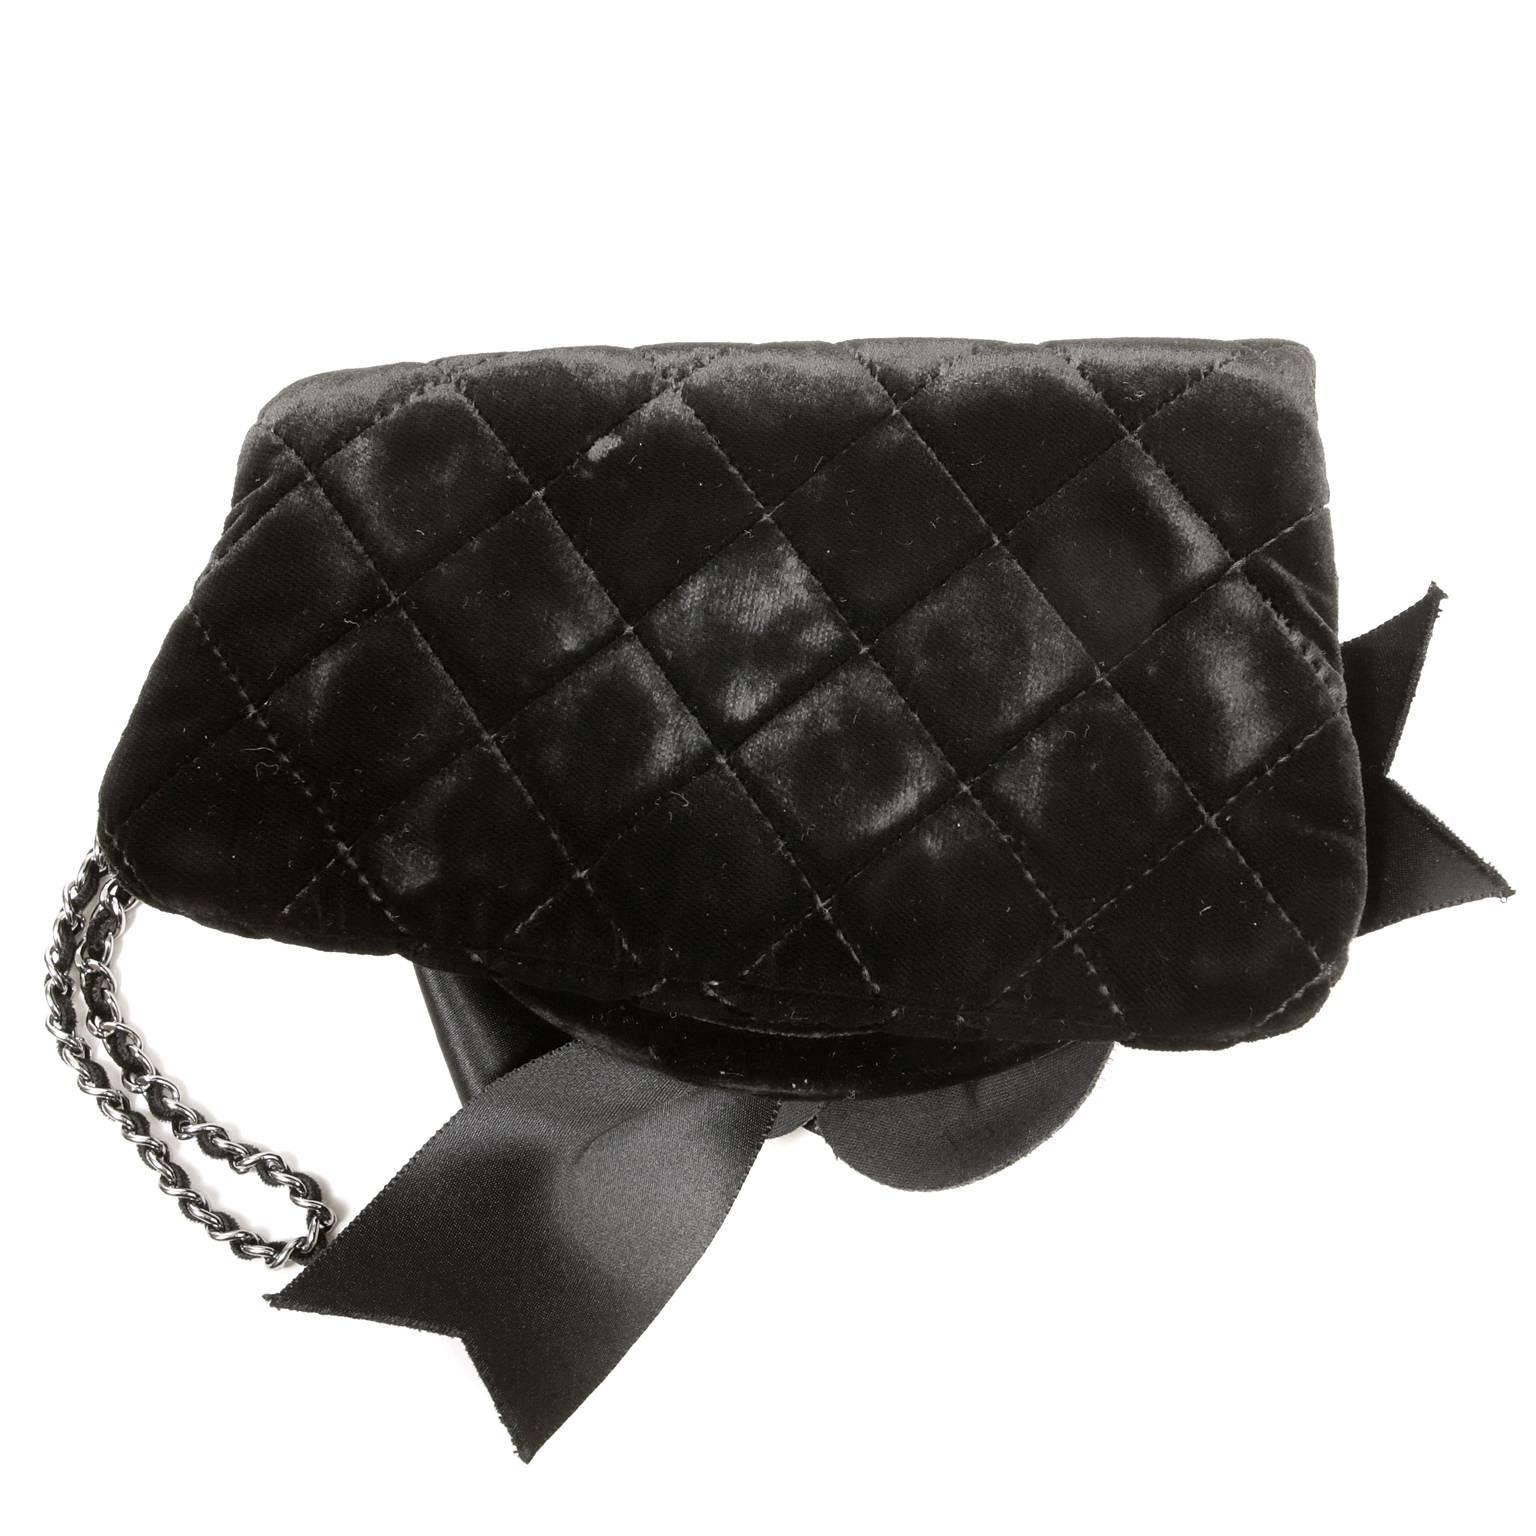 Chanel Black Velvet Camellia Evening Bag- Pristine
The exquisite wristlet is just right for carrying the essentials and is a must for any collection.
Black velvet pouch is quilted in signature Chanel diamond pattern.  An oversized velvet camellia